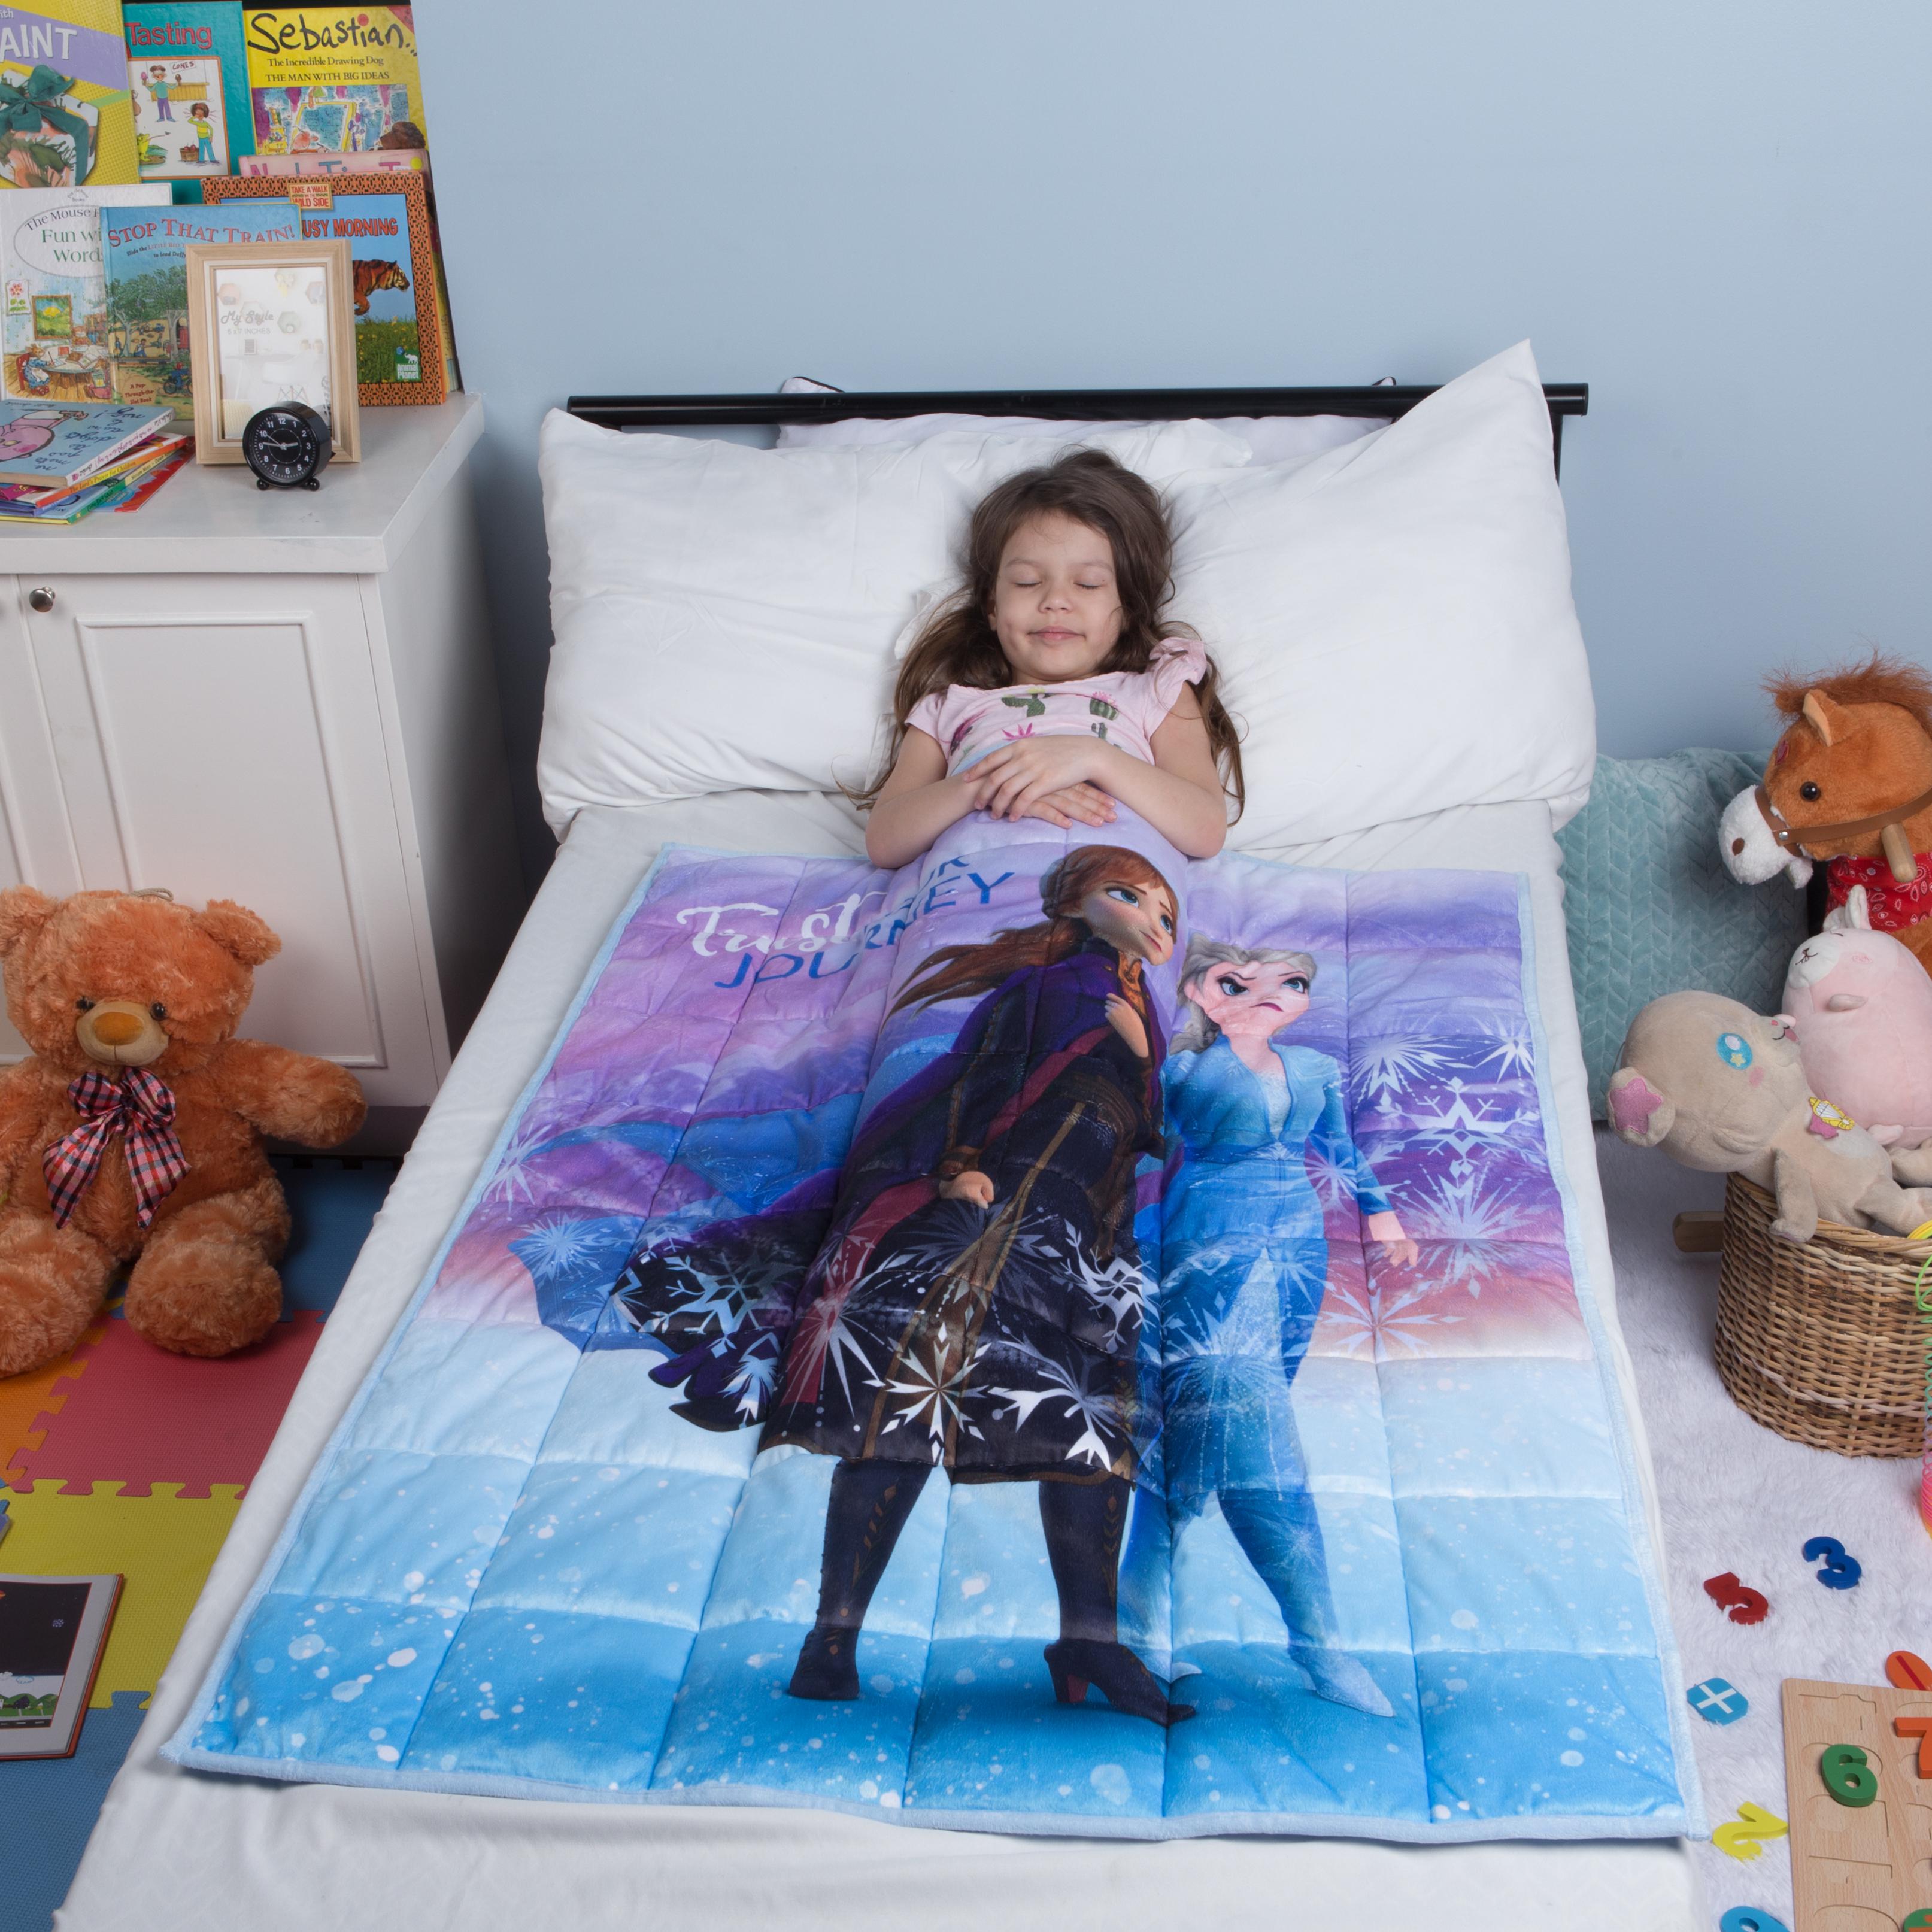 Disney's Frozen 2 Kids Weighted Blanket, 4.5lb, 36 x 48, Purple and Blue - image 1 of 10